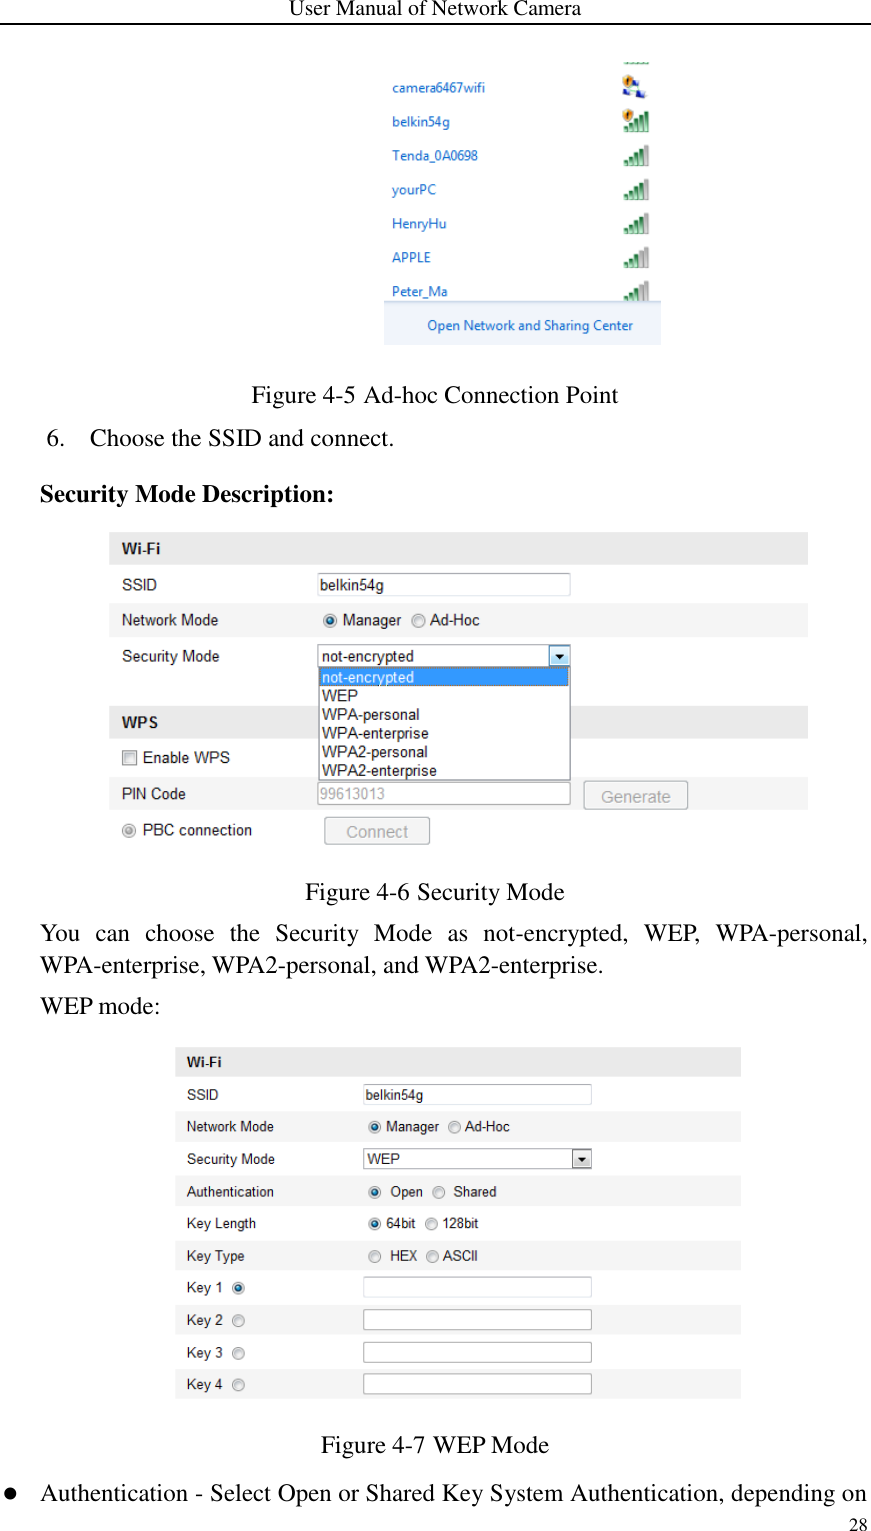 User Manual of Network Camera 28   Figure 4-5 Ad-hoc Connection Point   6. Choose the SSID and connect. Security Mode Description:  Figure 4-6 Security Mode   You  can  choose  the  Security  Mode  as  not-encrypted,  WEP,  WPA-personal, WPA-enterprise, WPA2-personal, and WPA2-enterprise. WEP mode:  Figure 4-7 WEP Mode  Authentication - Select Open or Shared Key System Authentication, depending on 